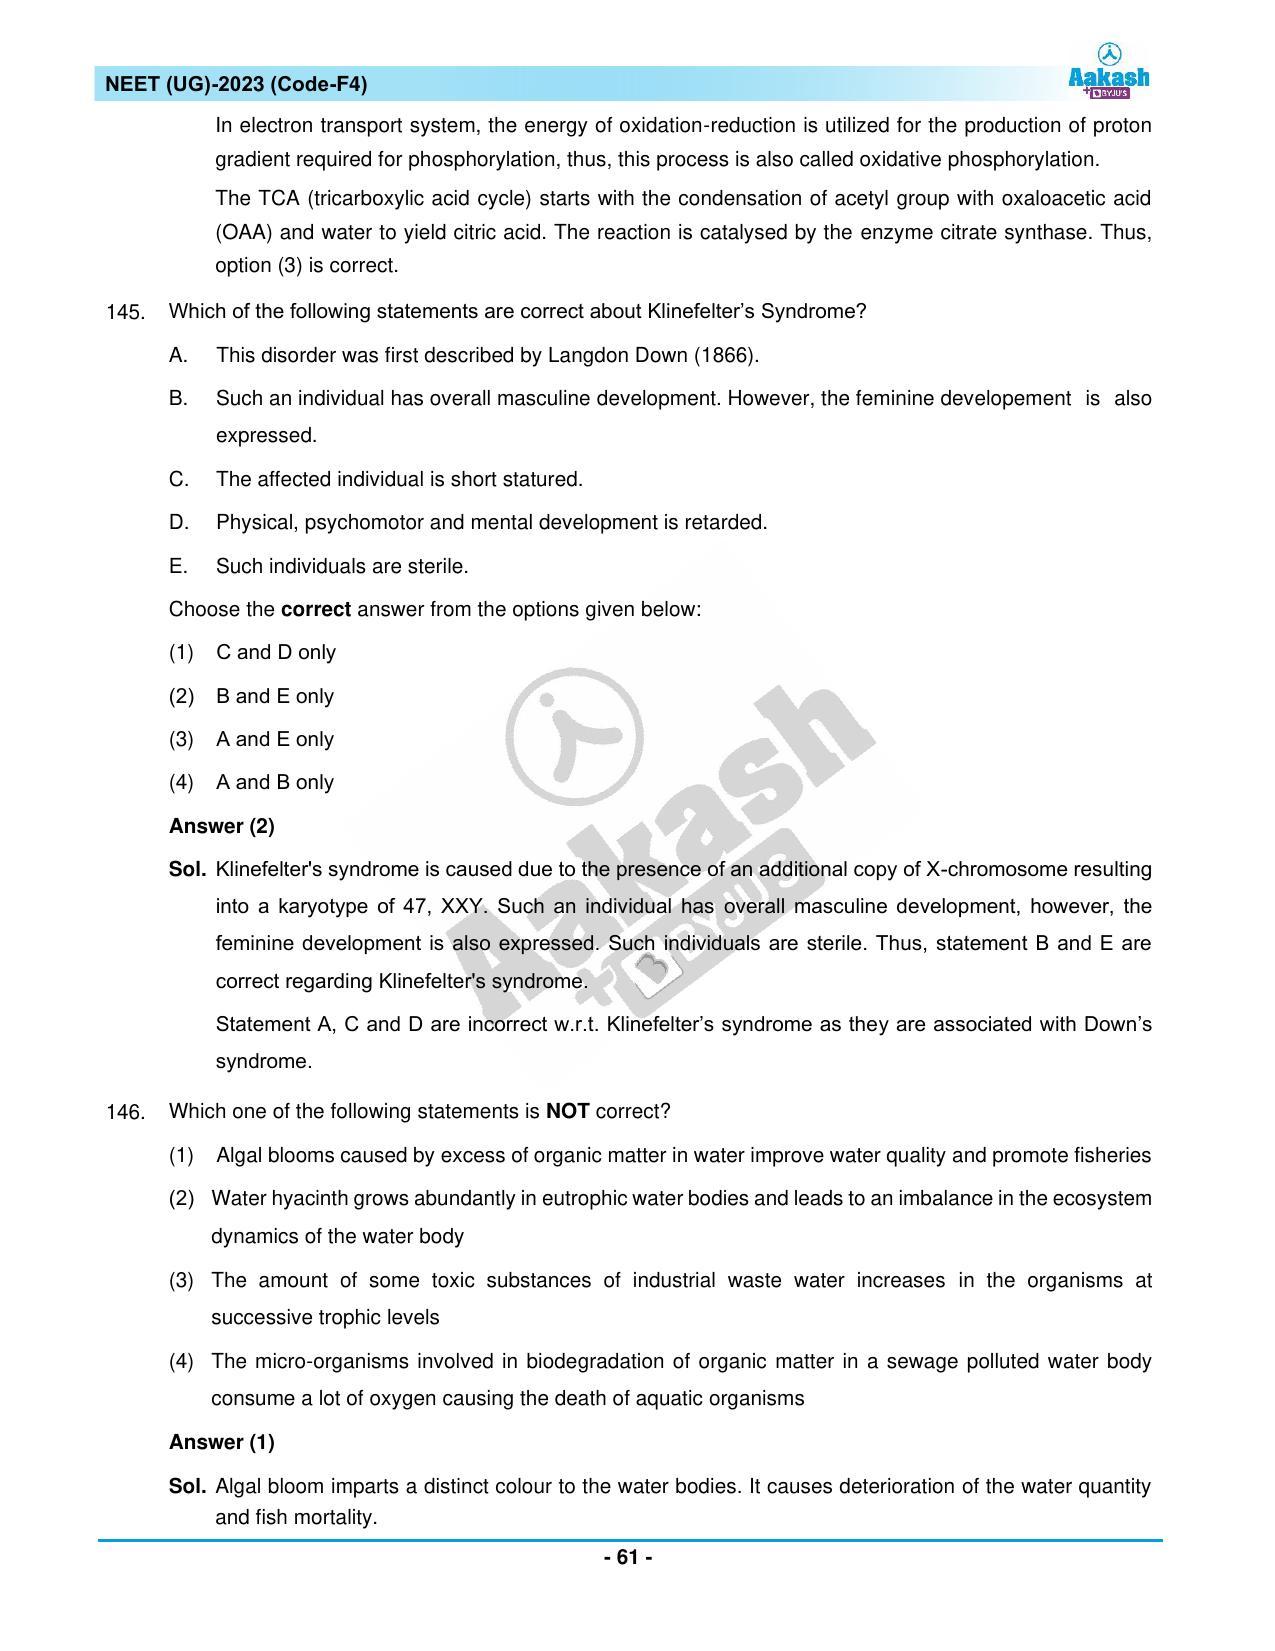 NEET 2023 Question Paper F4 - Page 61